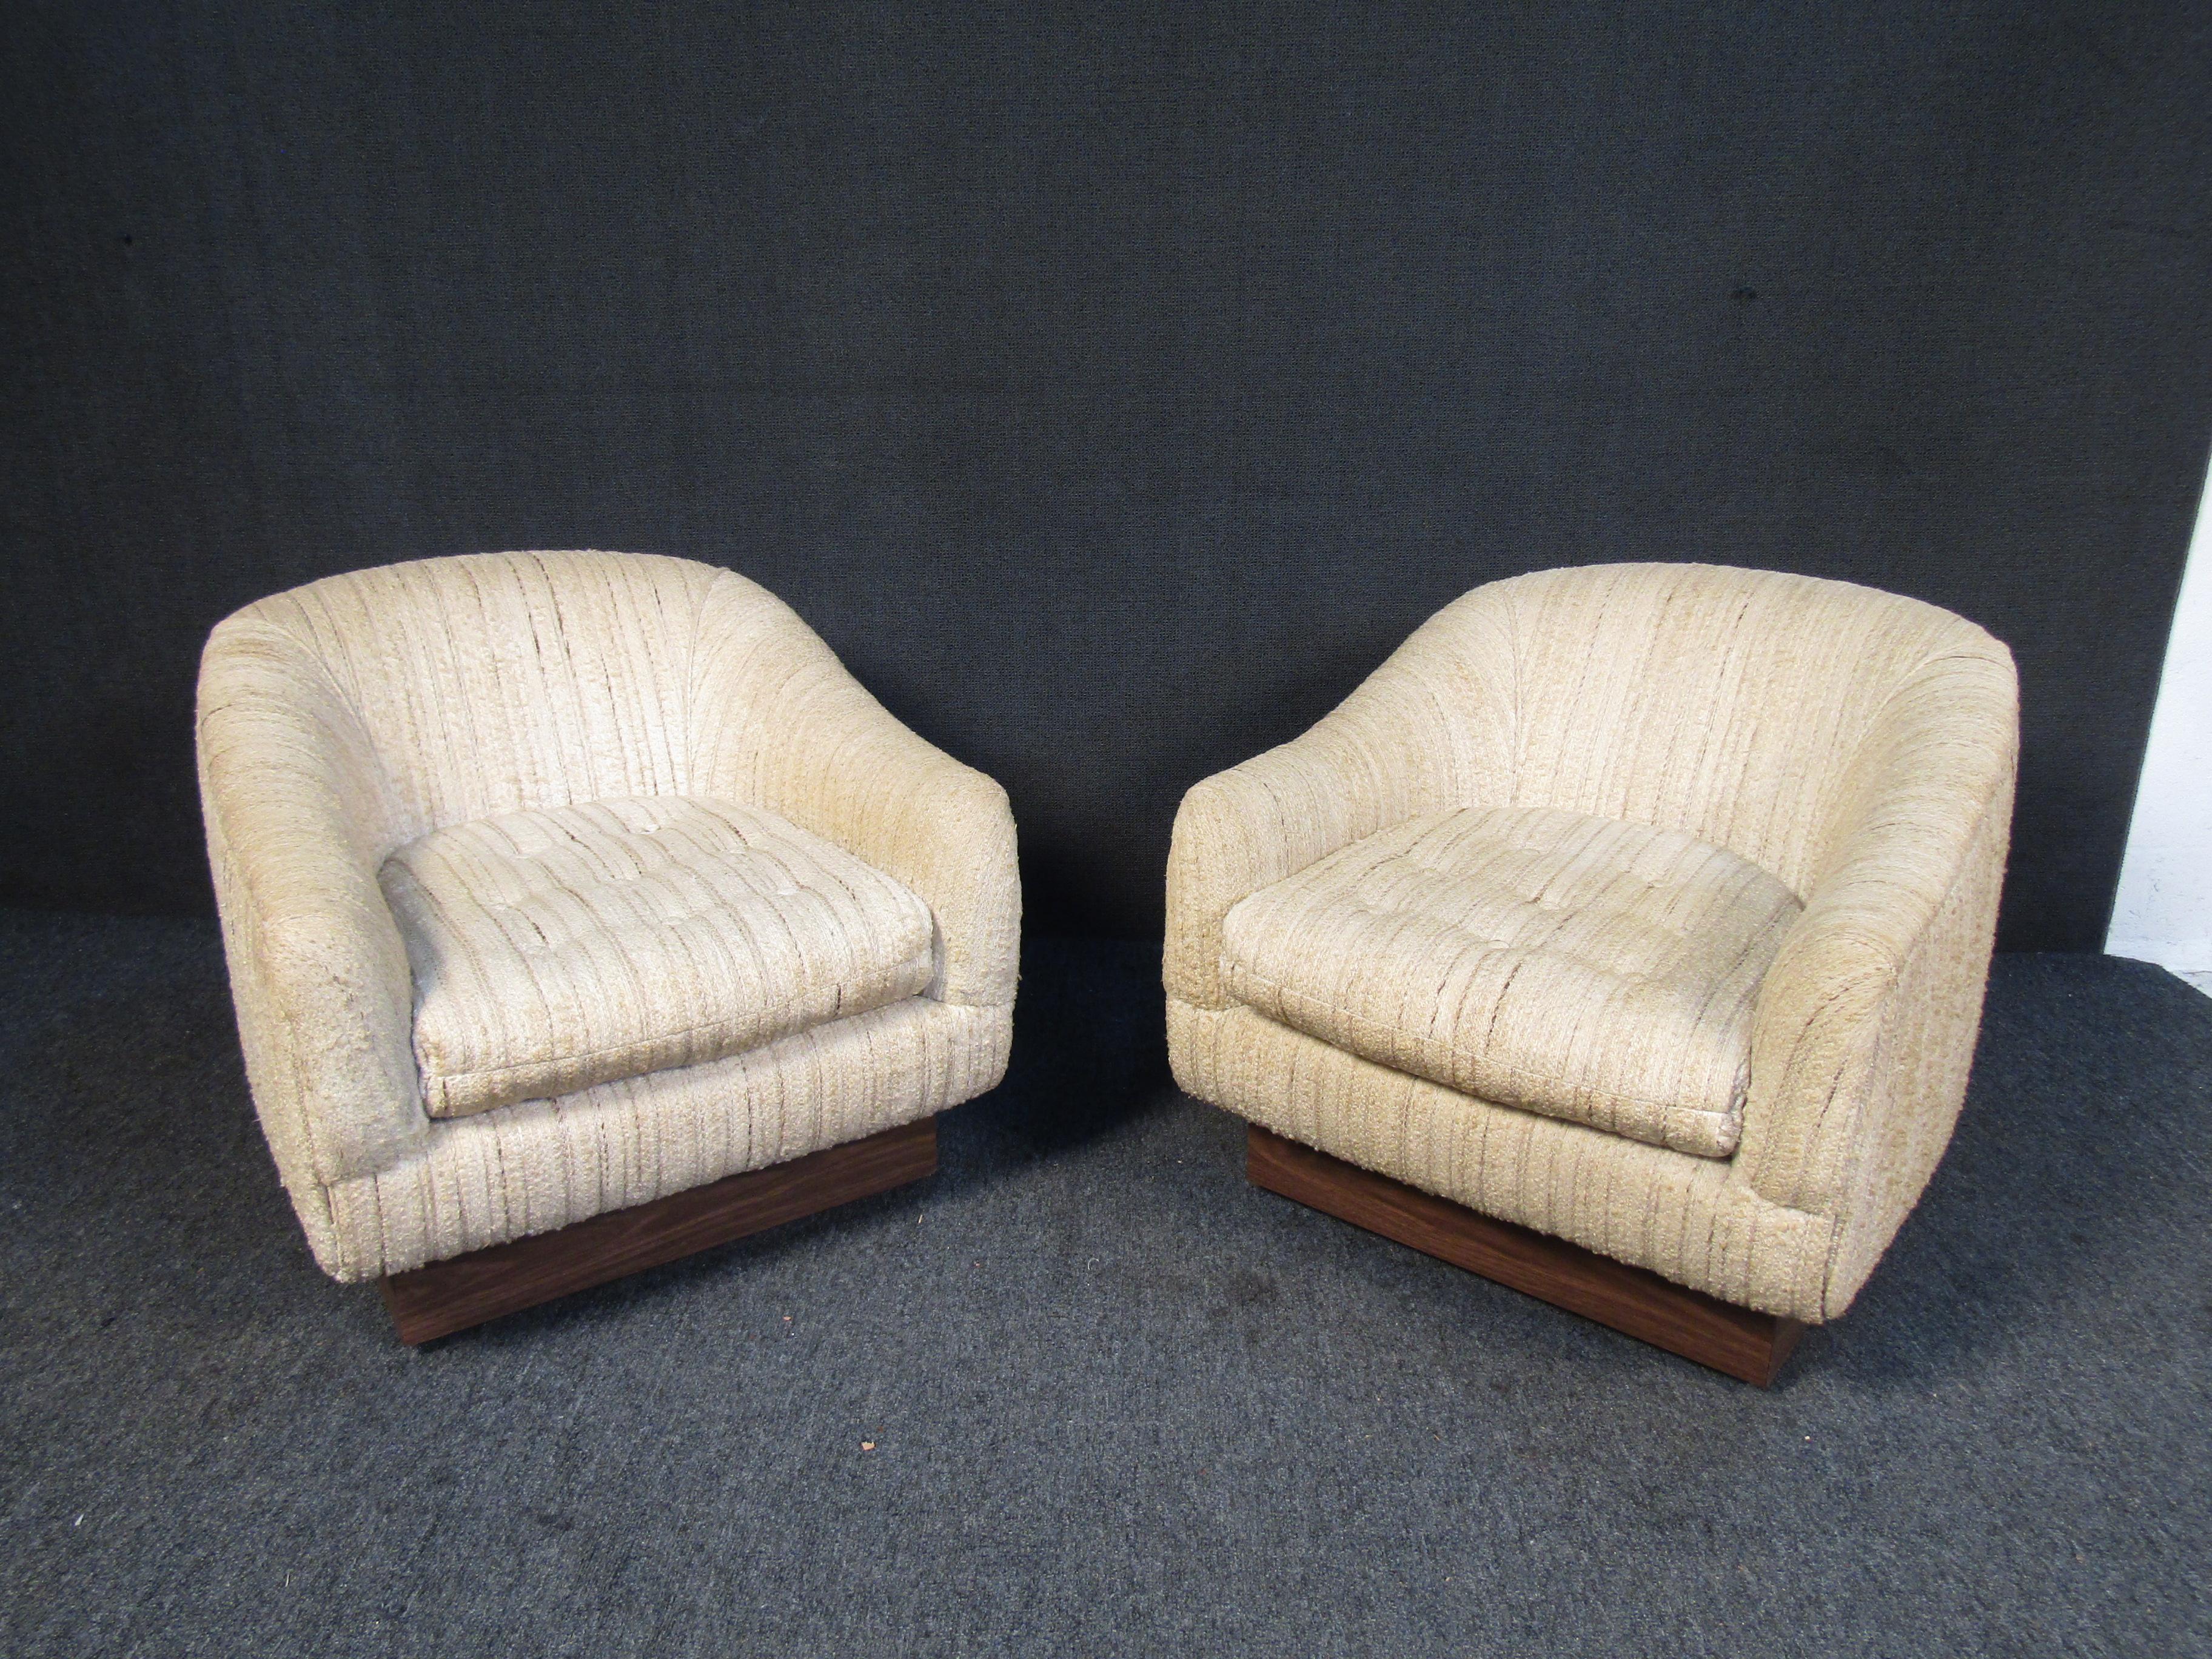 A pair of stylish Mid-Century Modern club chairs with thick upholstery and elegant wooden bases. Please confirm item location with seller (NY/NJ).